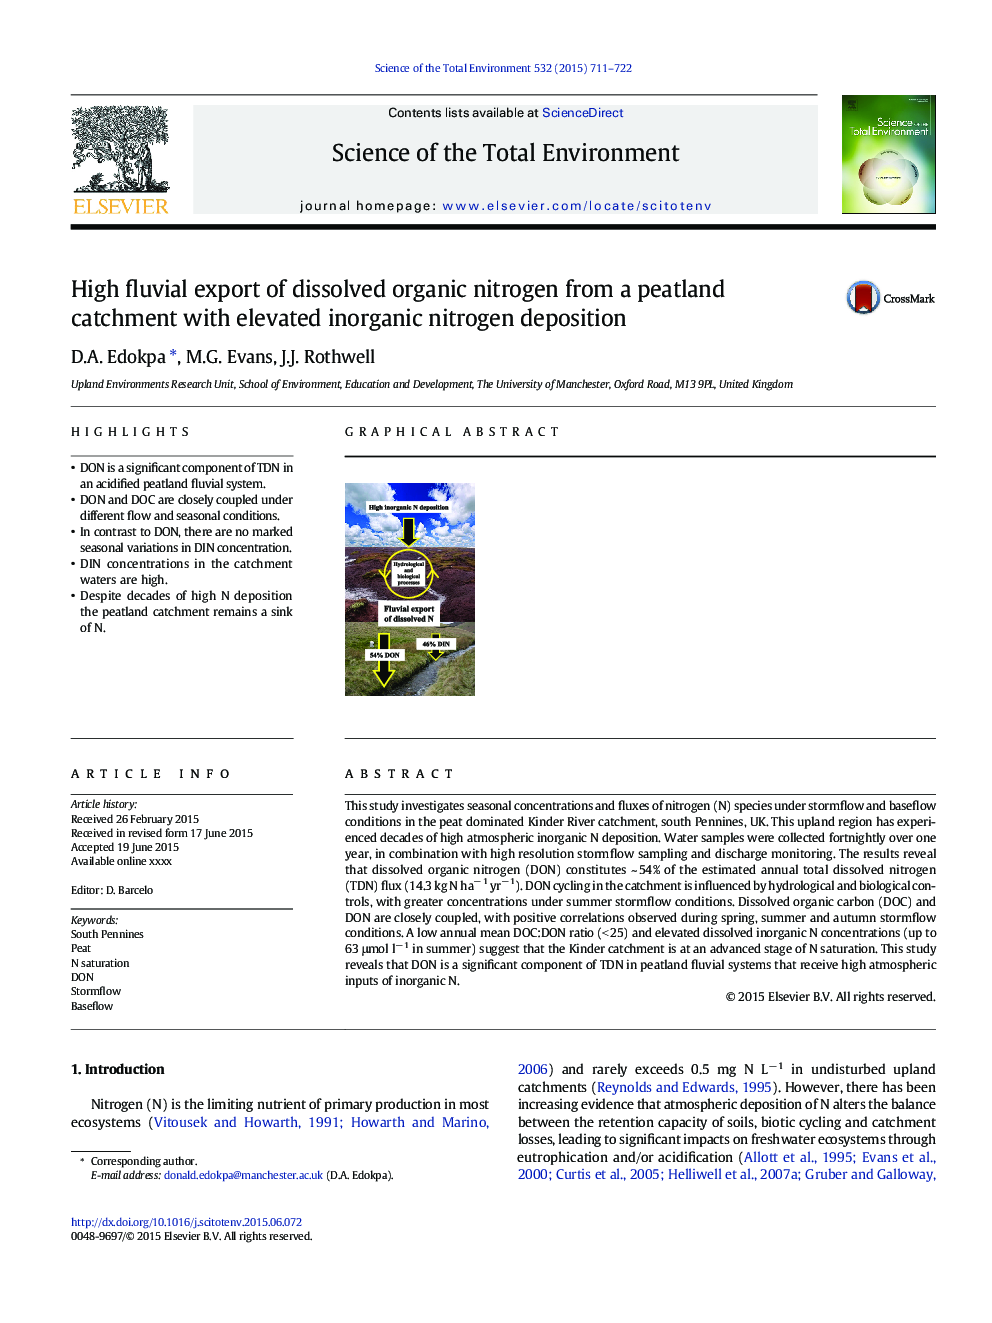 High fluvial export of dissolved organic nitrogen from a peatland catchment with elevated inorganic nitrogen deposition